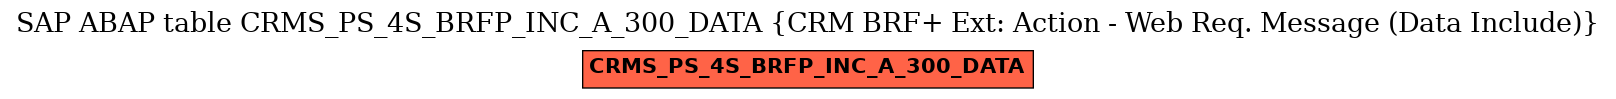 E-R Diagram for table CRMS_PS_4S_BRFP_INC_A_300_DATA (CRM BRF+ Ext: Action - Web Req. Message (Data Include))